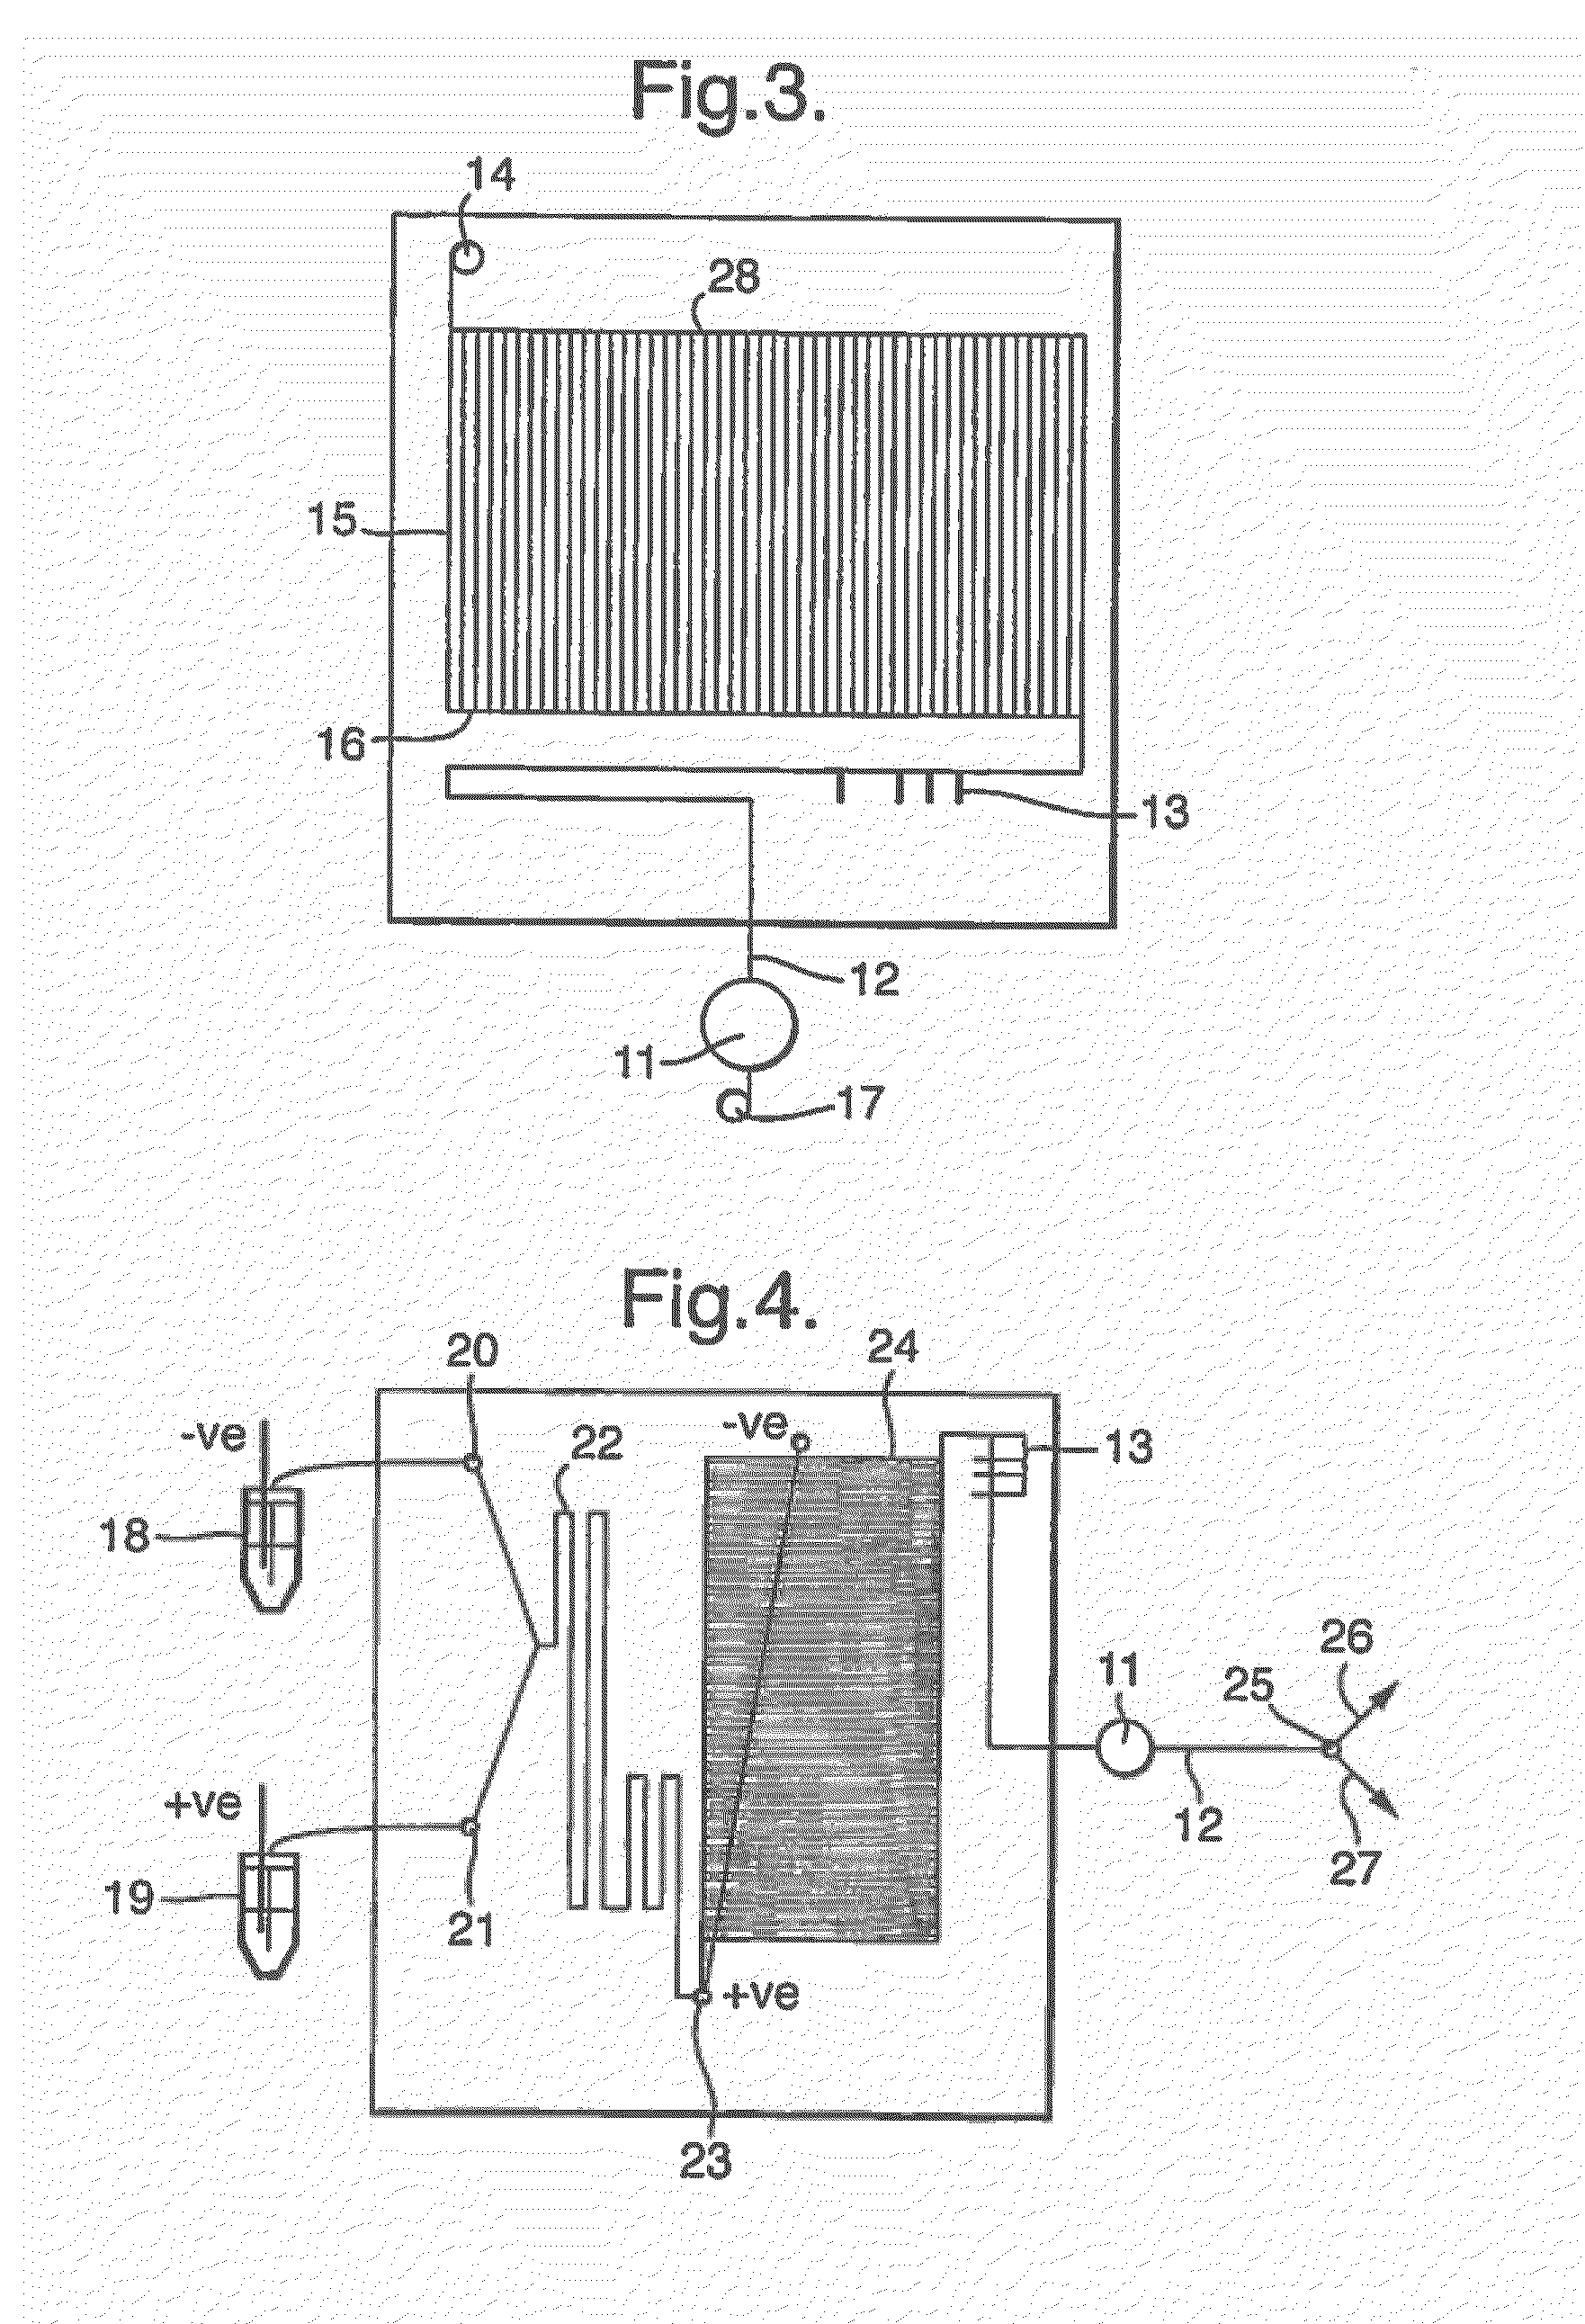 Use of microfabricated devices